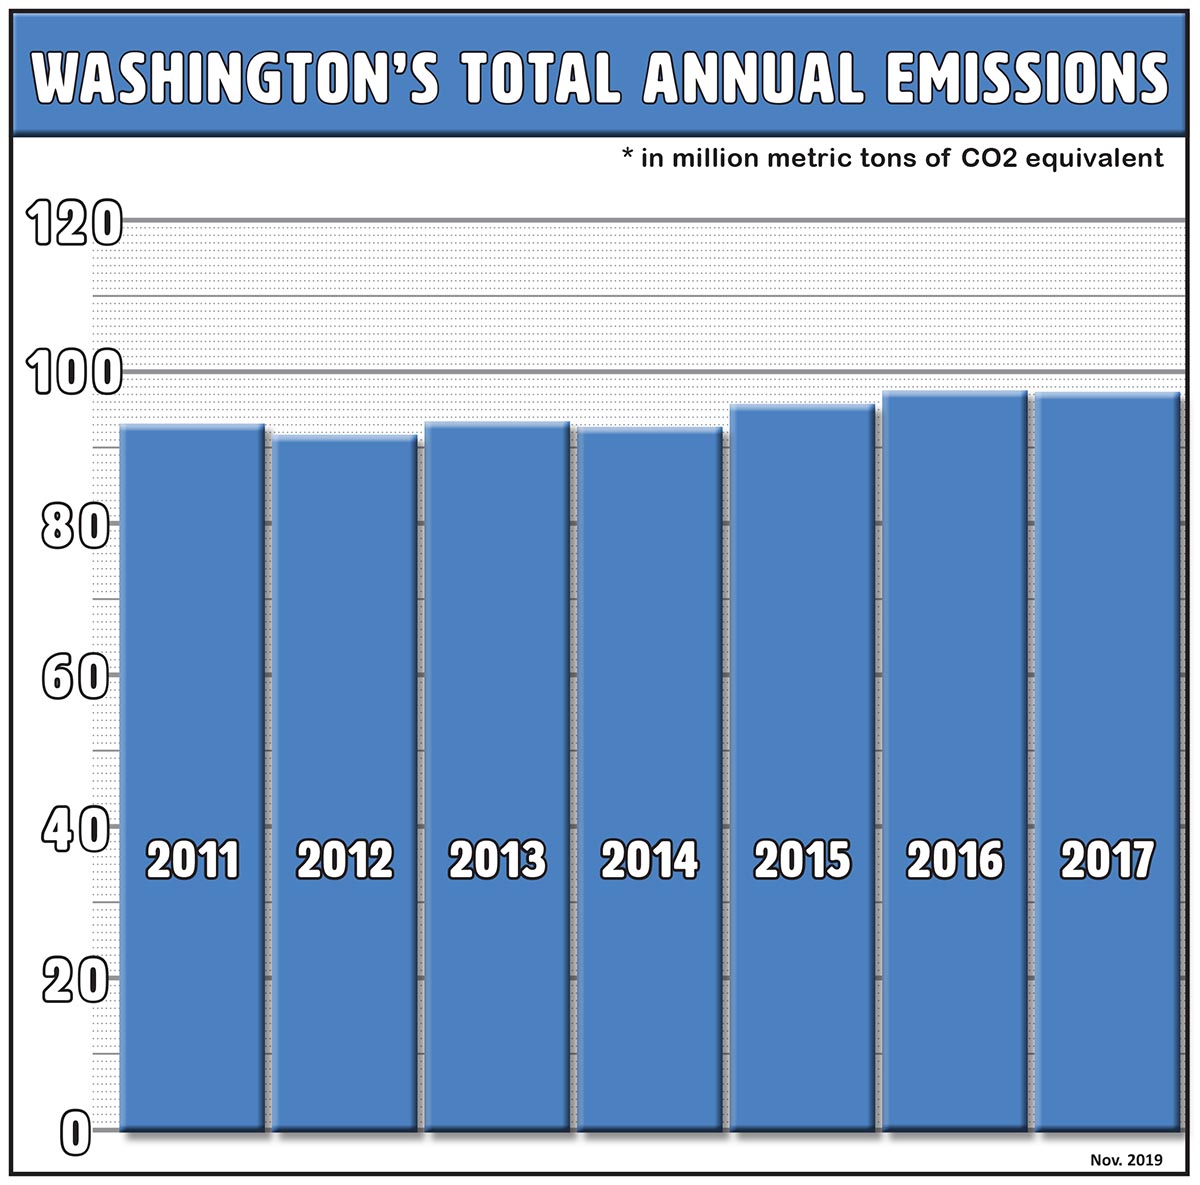 A bar chart showing greenhouse gas emissions in Washington between 2011 and 2017. Emissions have generally been growing slowly, but declined slightly in 2017 to 97.5 million metric tons. 